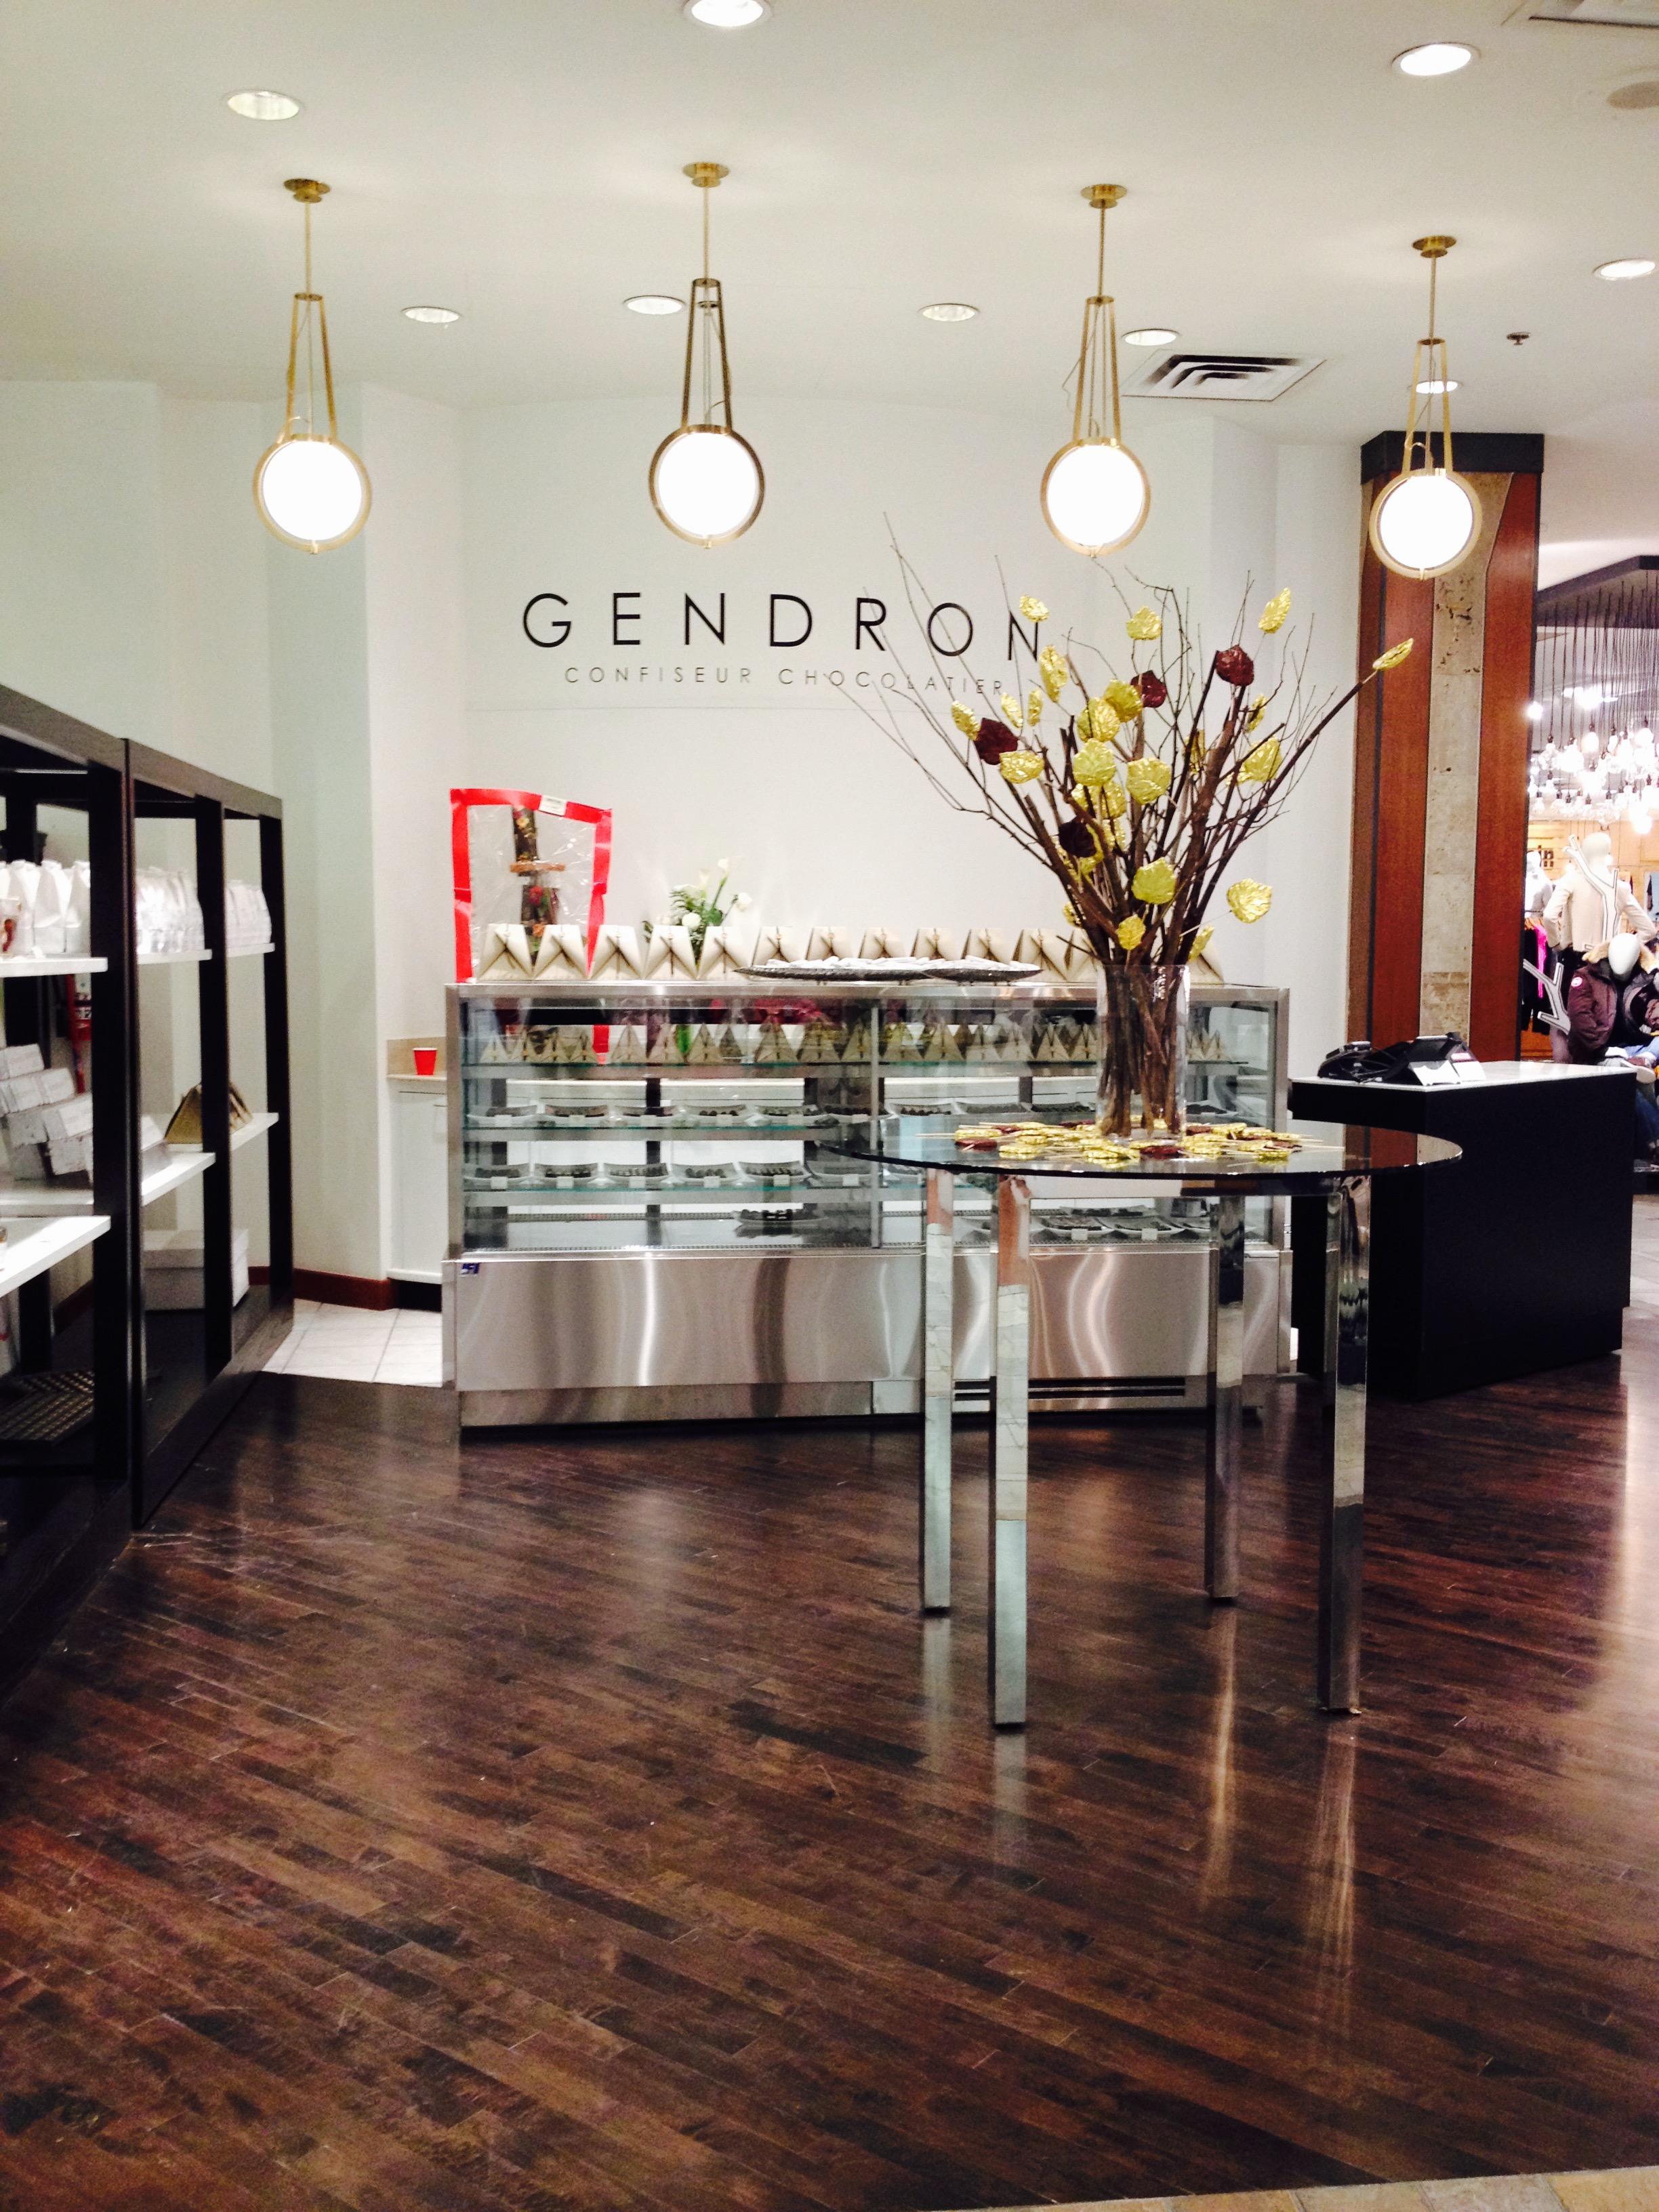 Cover image of this place Gendron Confiseur Chocolatier